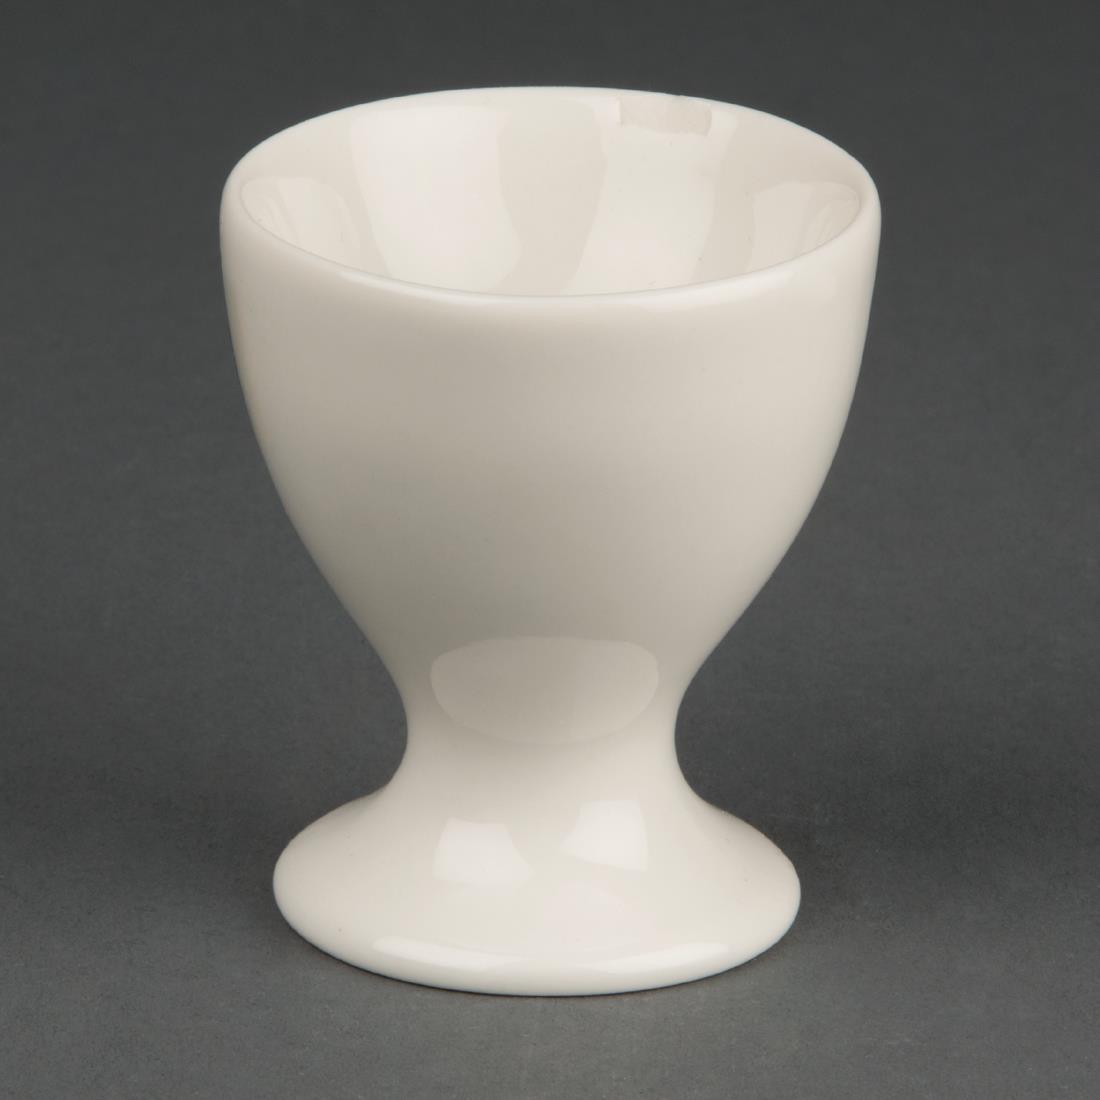 Olympia Ivory Egg Cups 60mm (Pack of 12) - U145  - 1